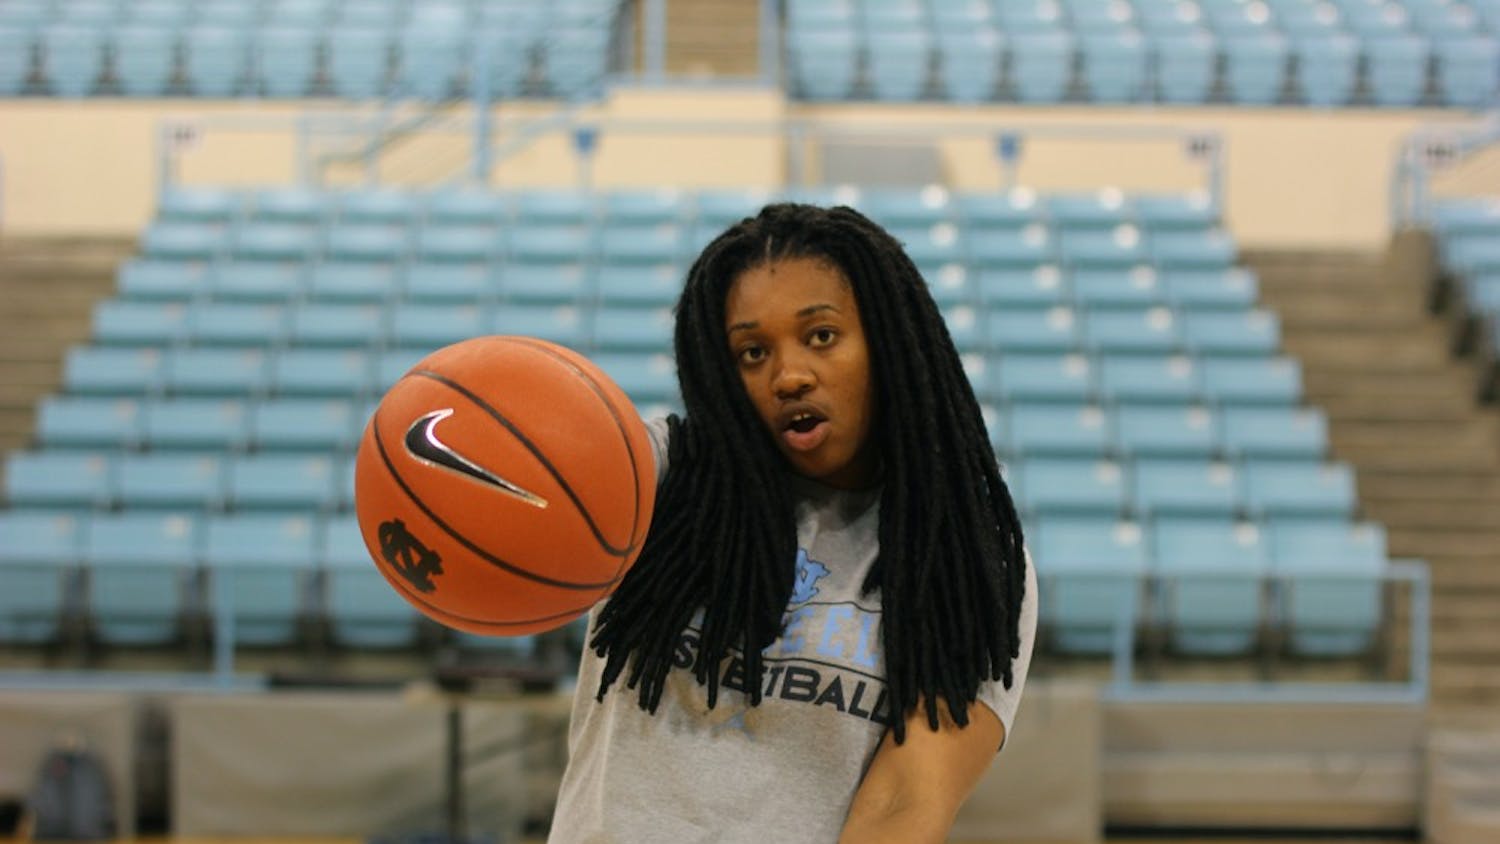 Hillary Fuller is a redshirt senior in her fifth year on UNC's women's basketball team.